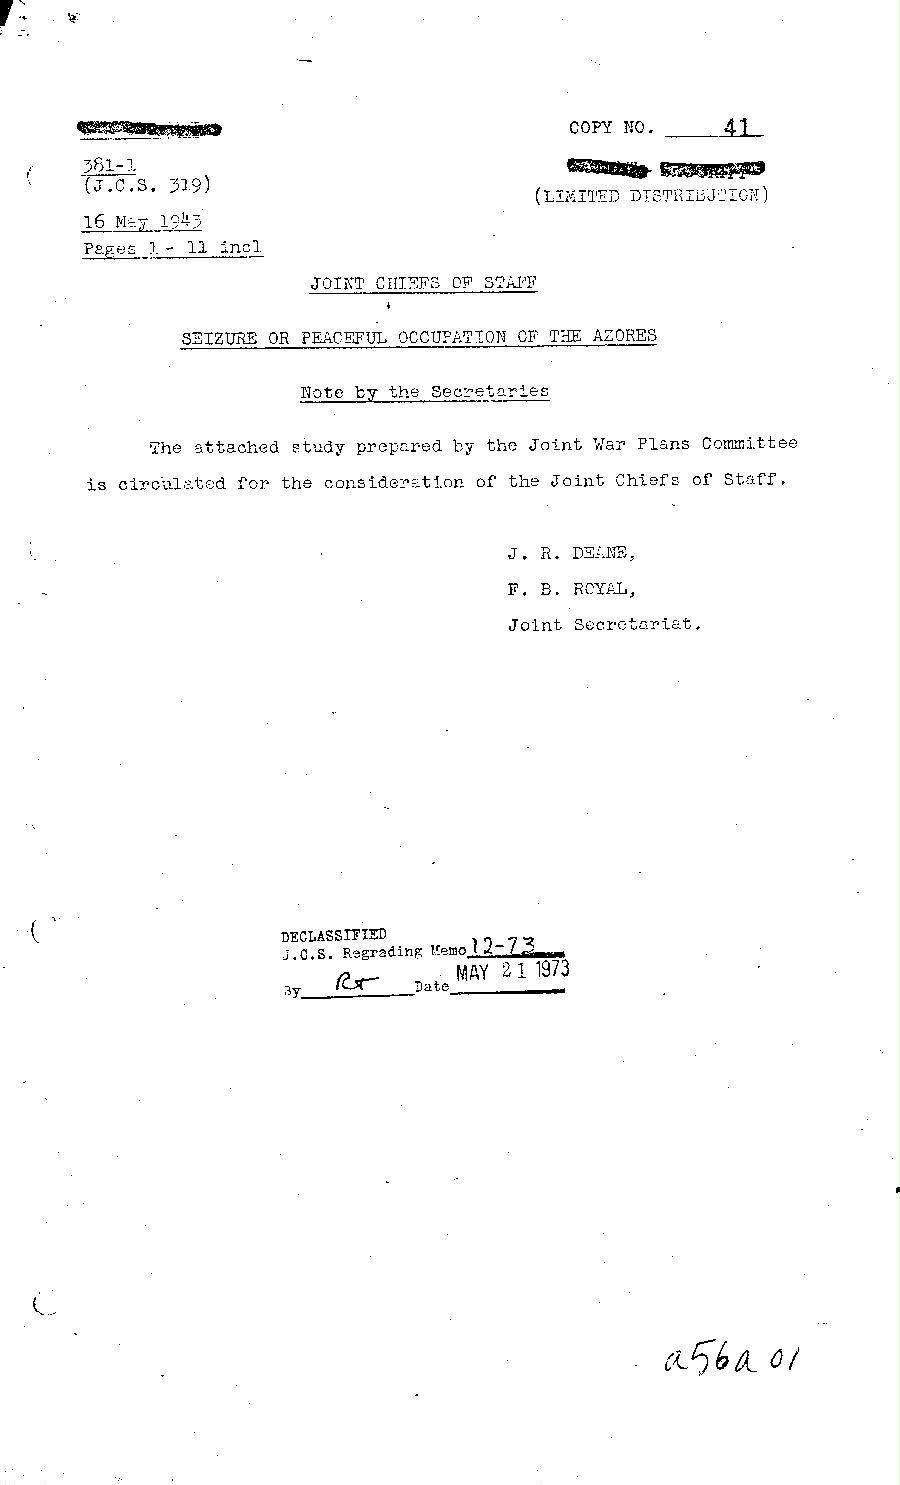 [a56a01.jpg] - Joint Chiefs of Staff Reprt; Seizure of Peaceful Occupation of the Azores-May 16, 1943